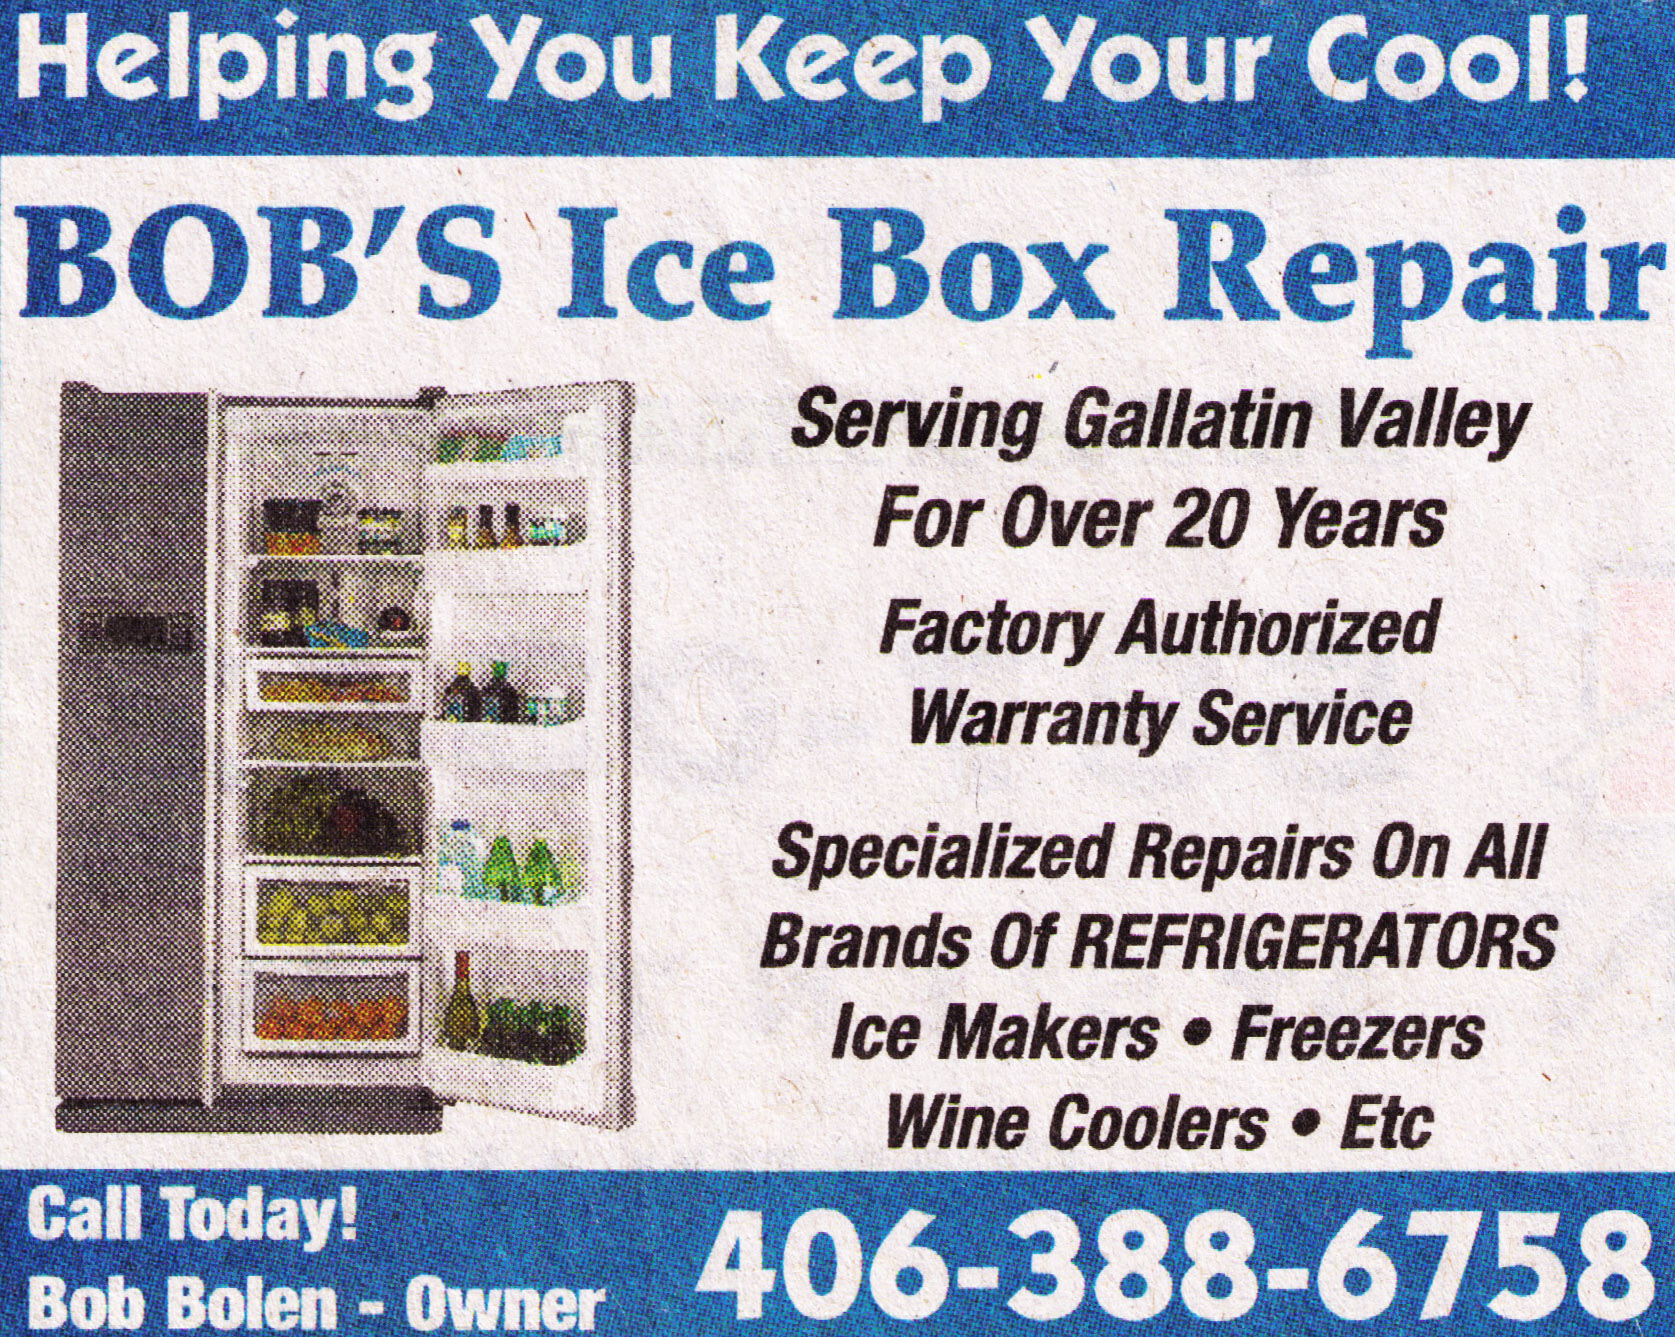 Bob's Icebox Repair - Repairing All Brands of Refrigerators, Freezers, Ice-makers, and Wine Coolers for Over 20 Years - Contact Information